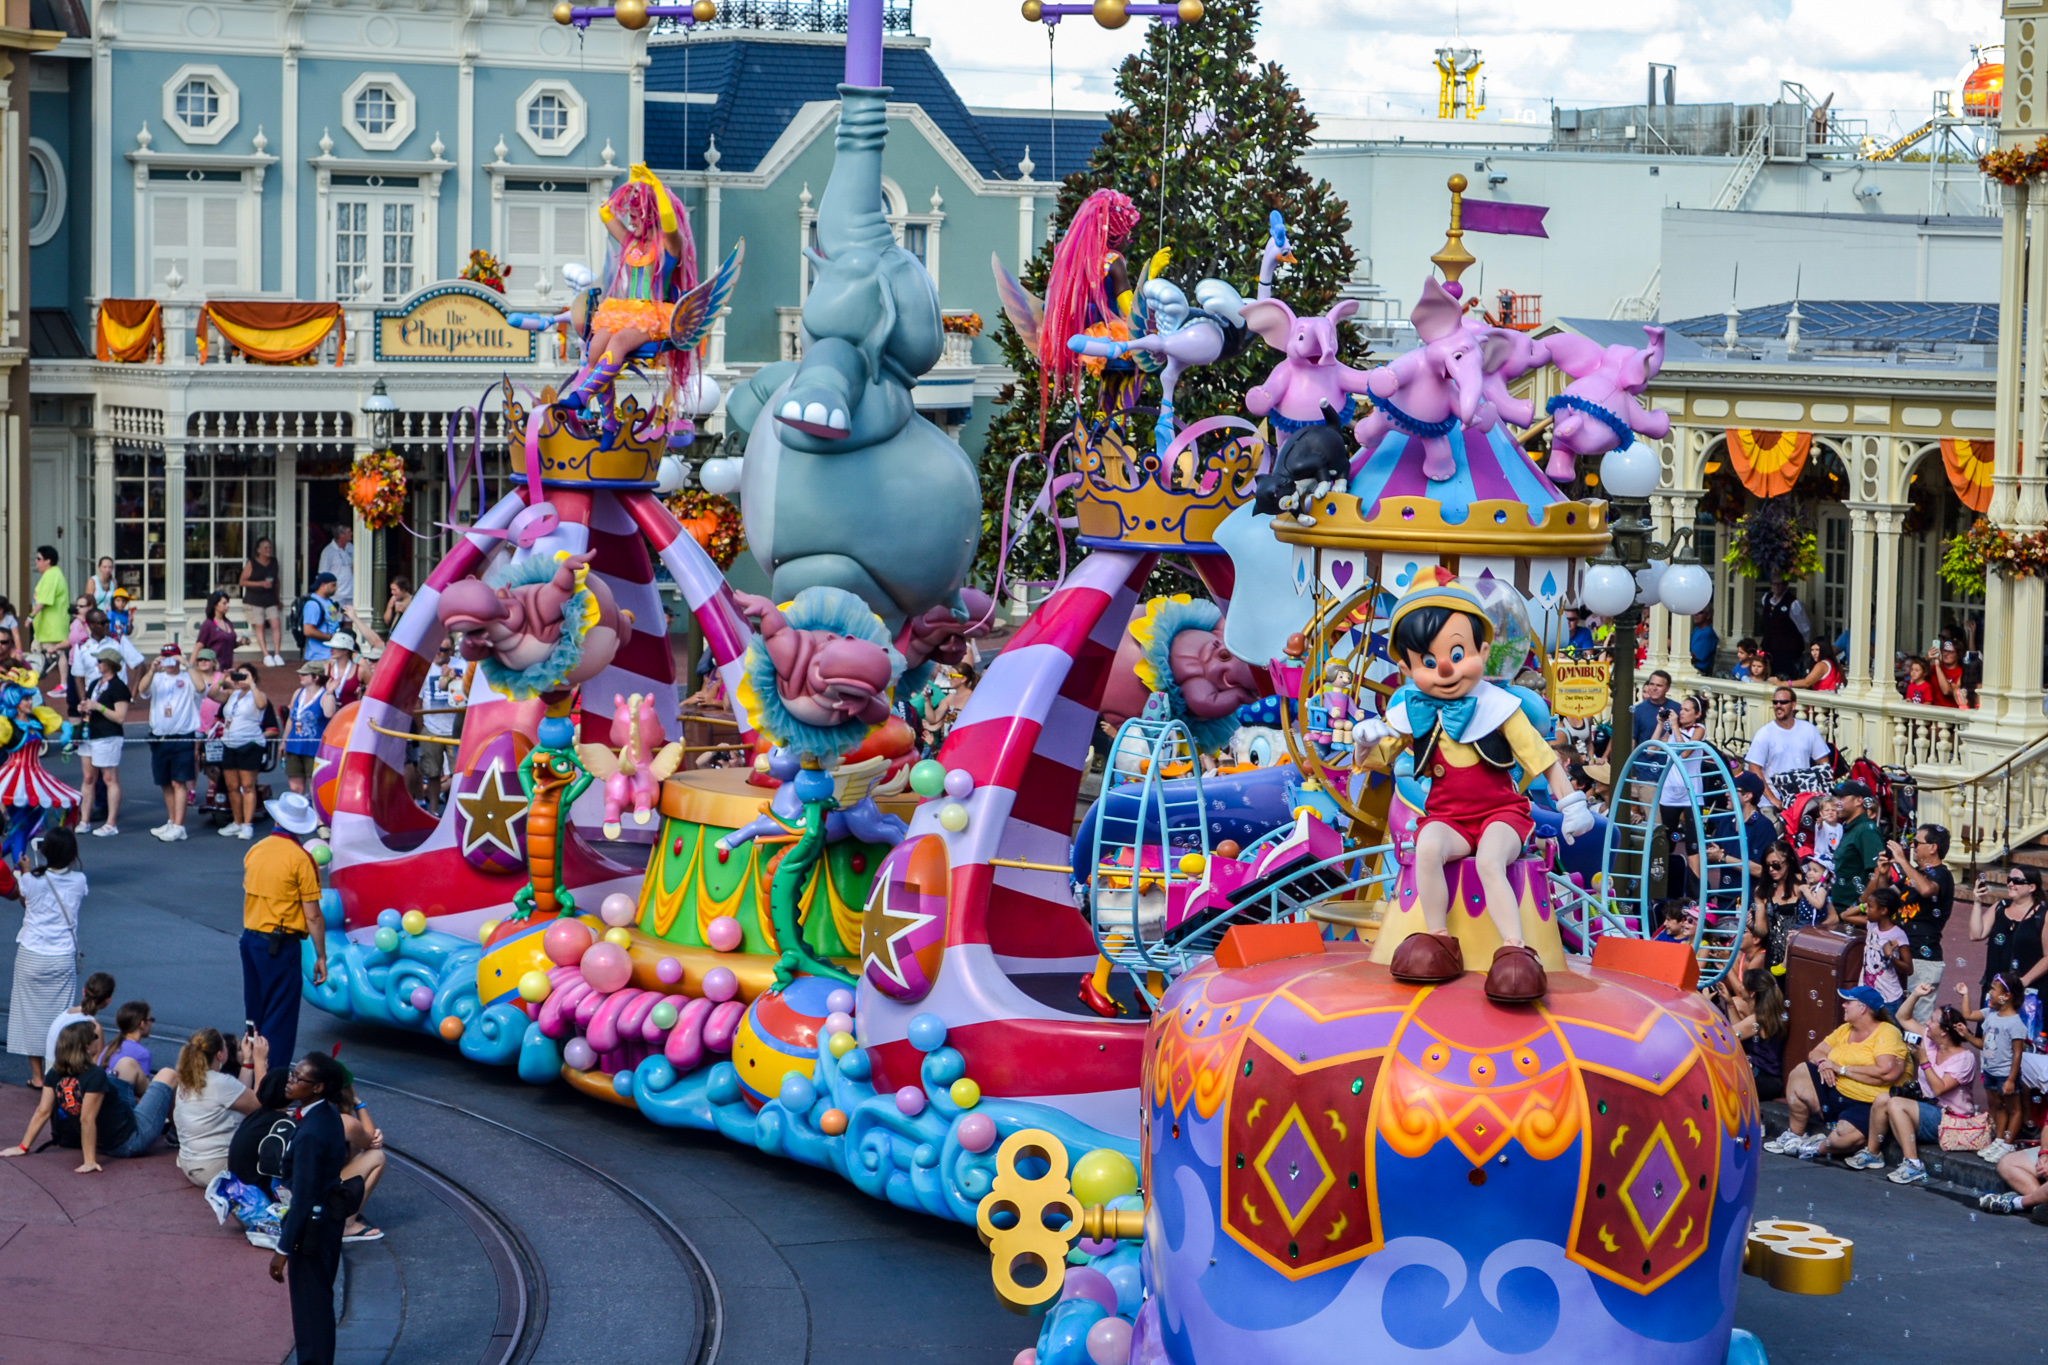 View of the Pinocchio float in the Festival of Fantasy Parade, a sensory-friendly attraction in Magic Kingdom.